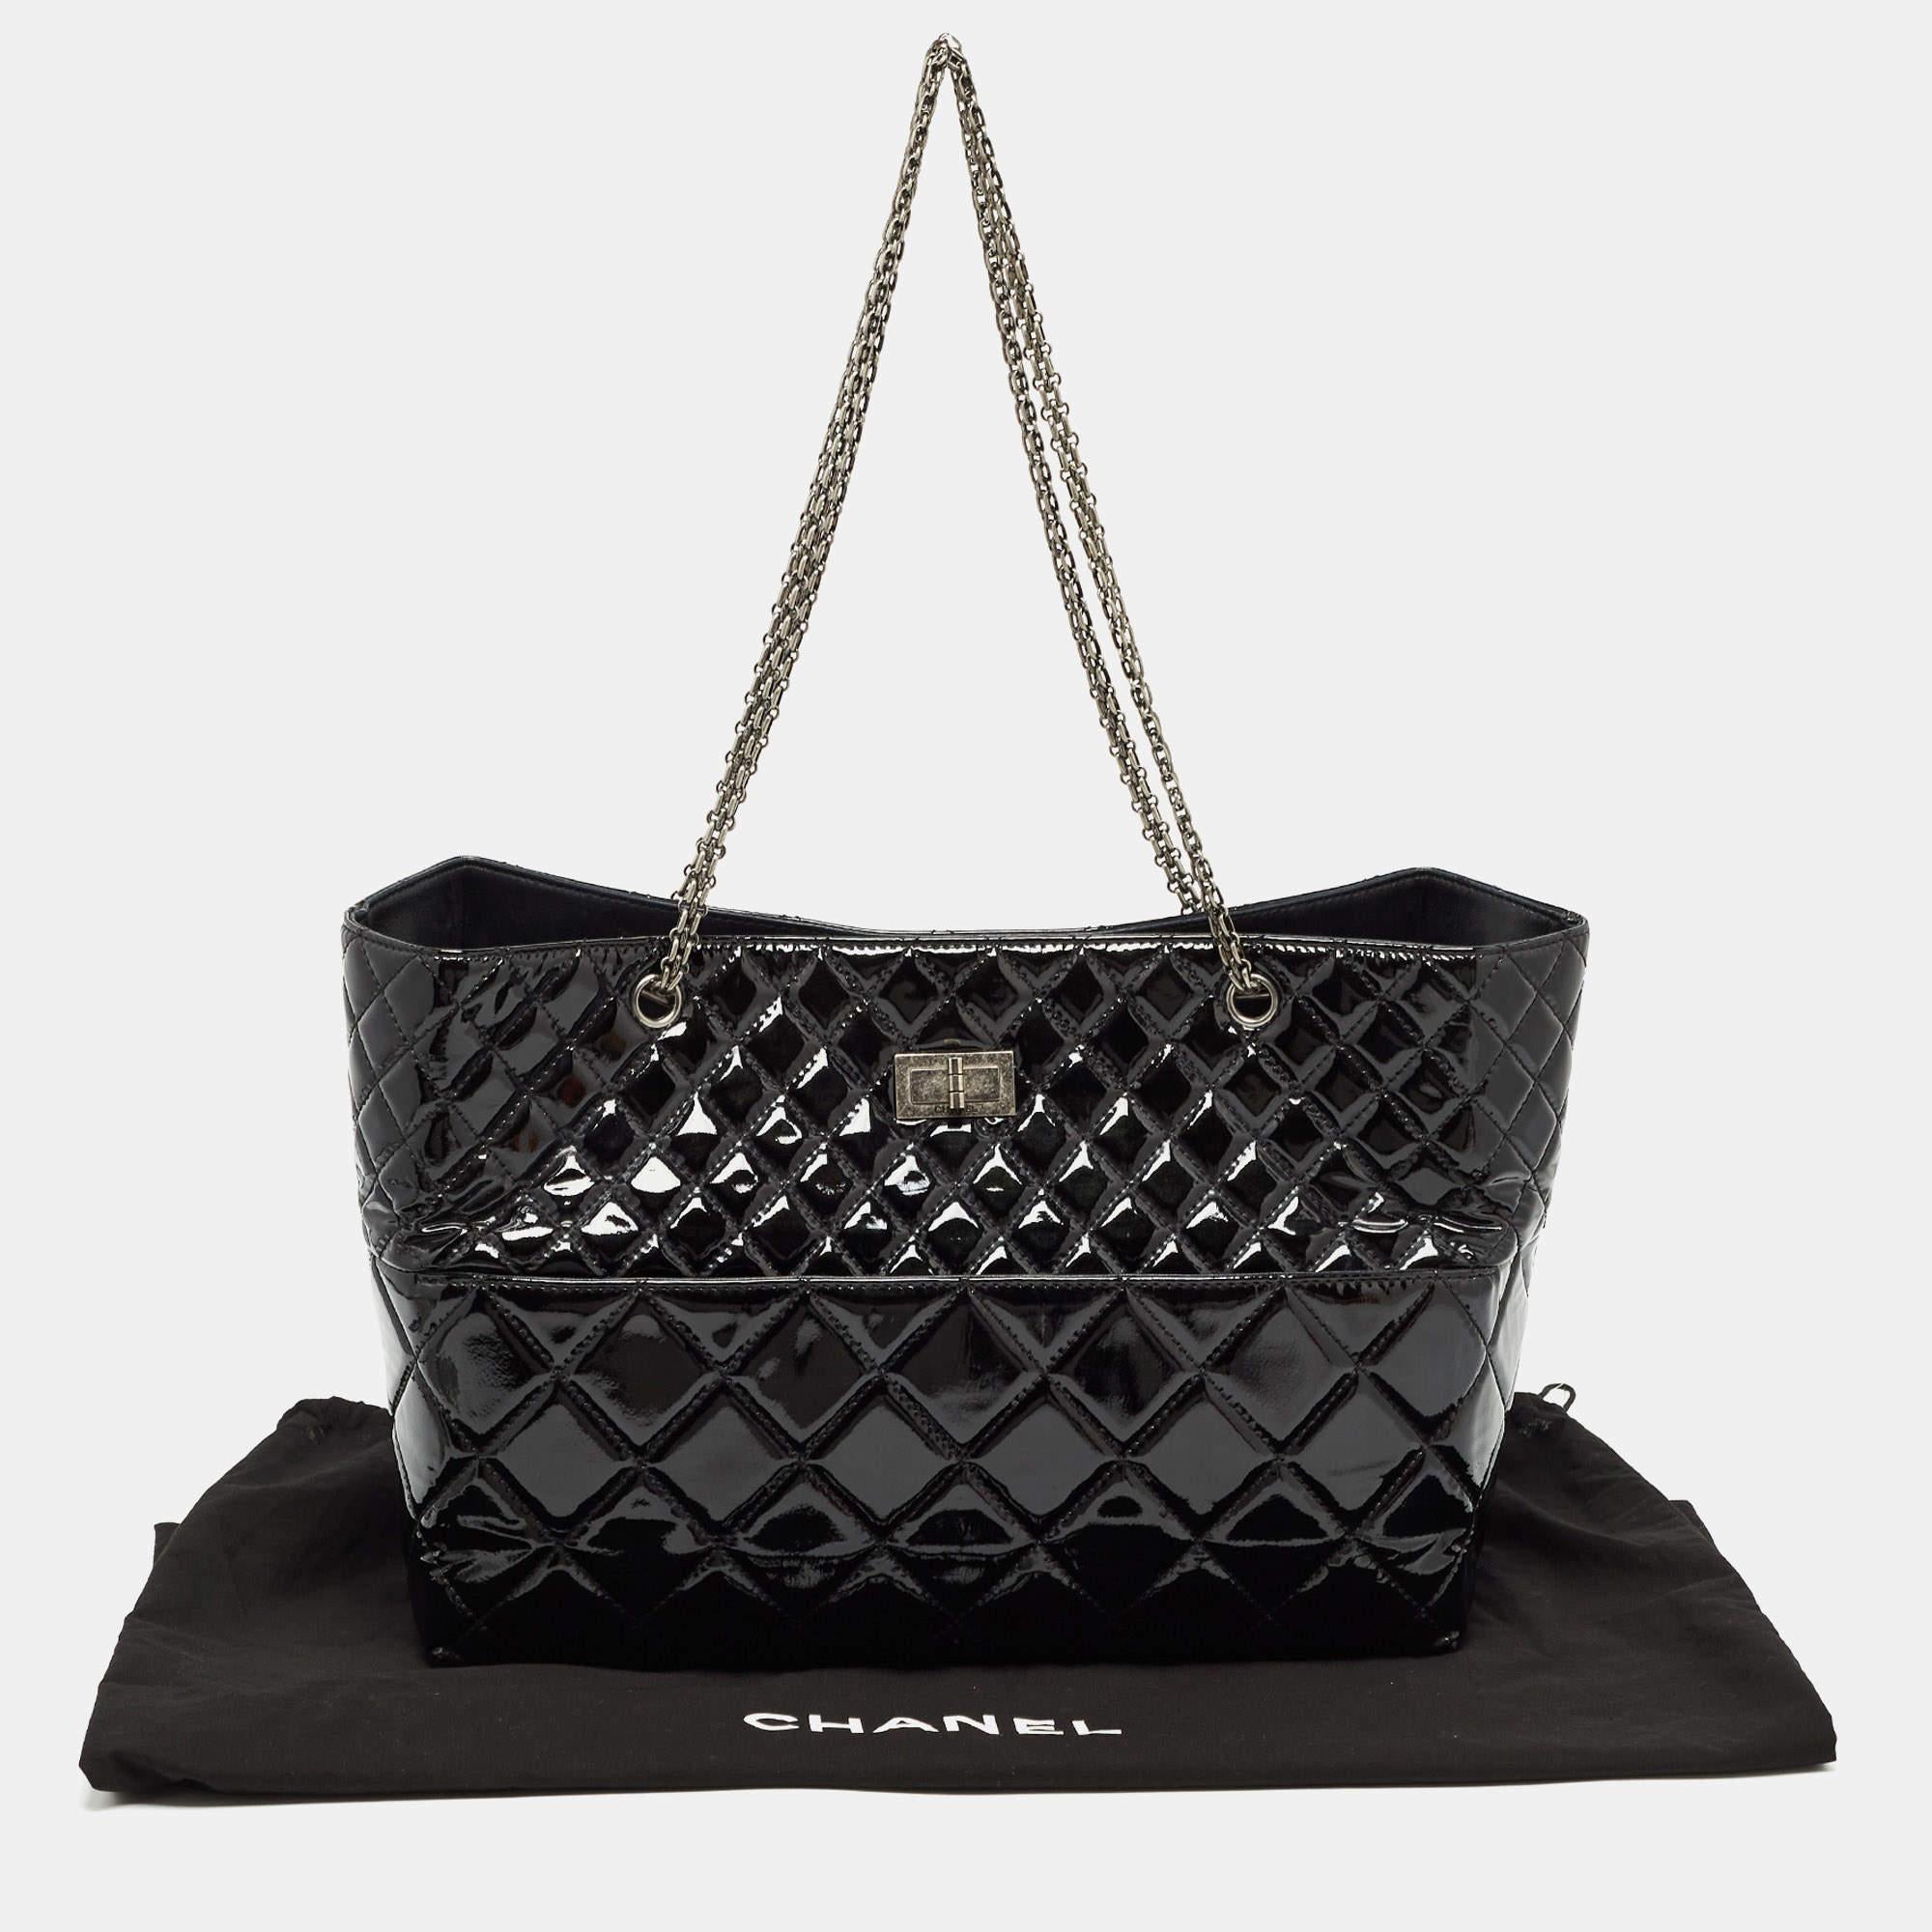 Chanel Black Quilted Patent Leather Reissue East West Tote For Sale 2